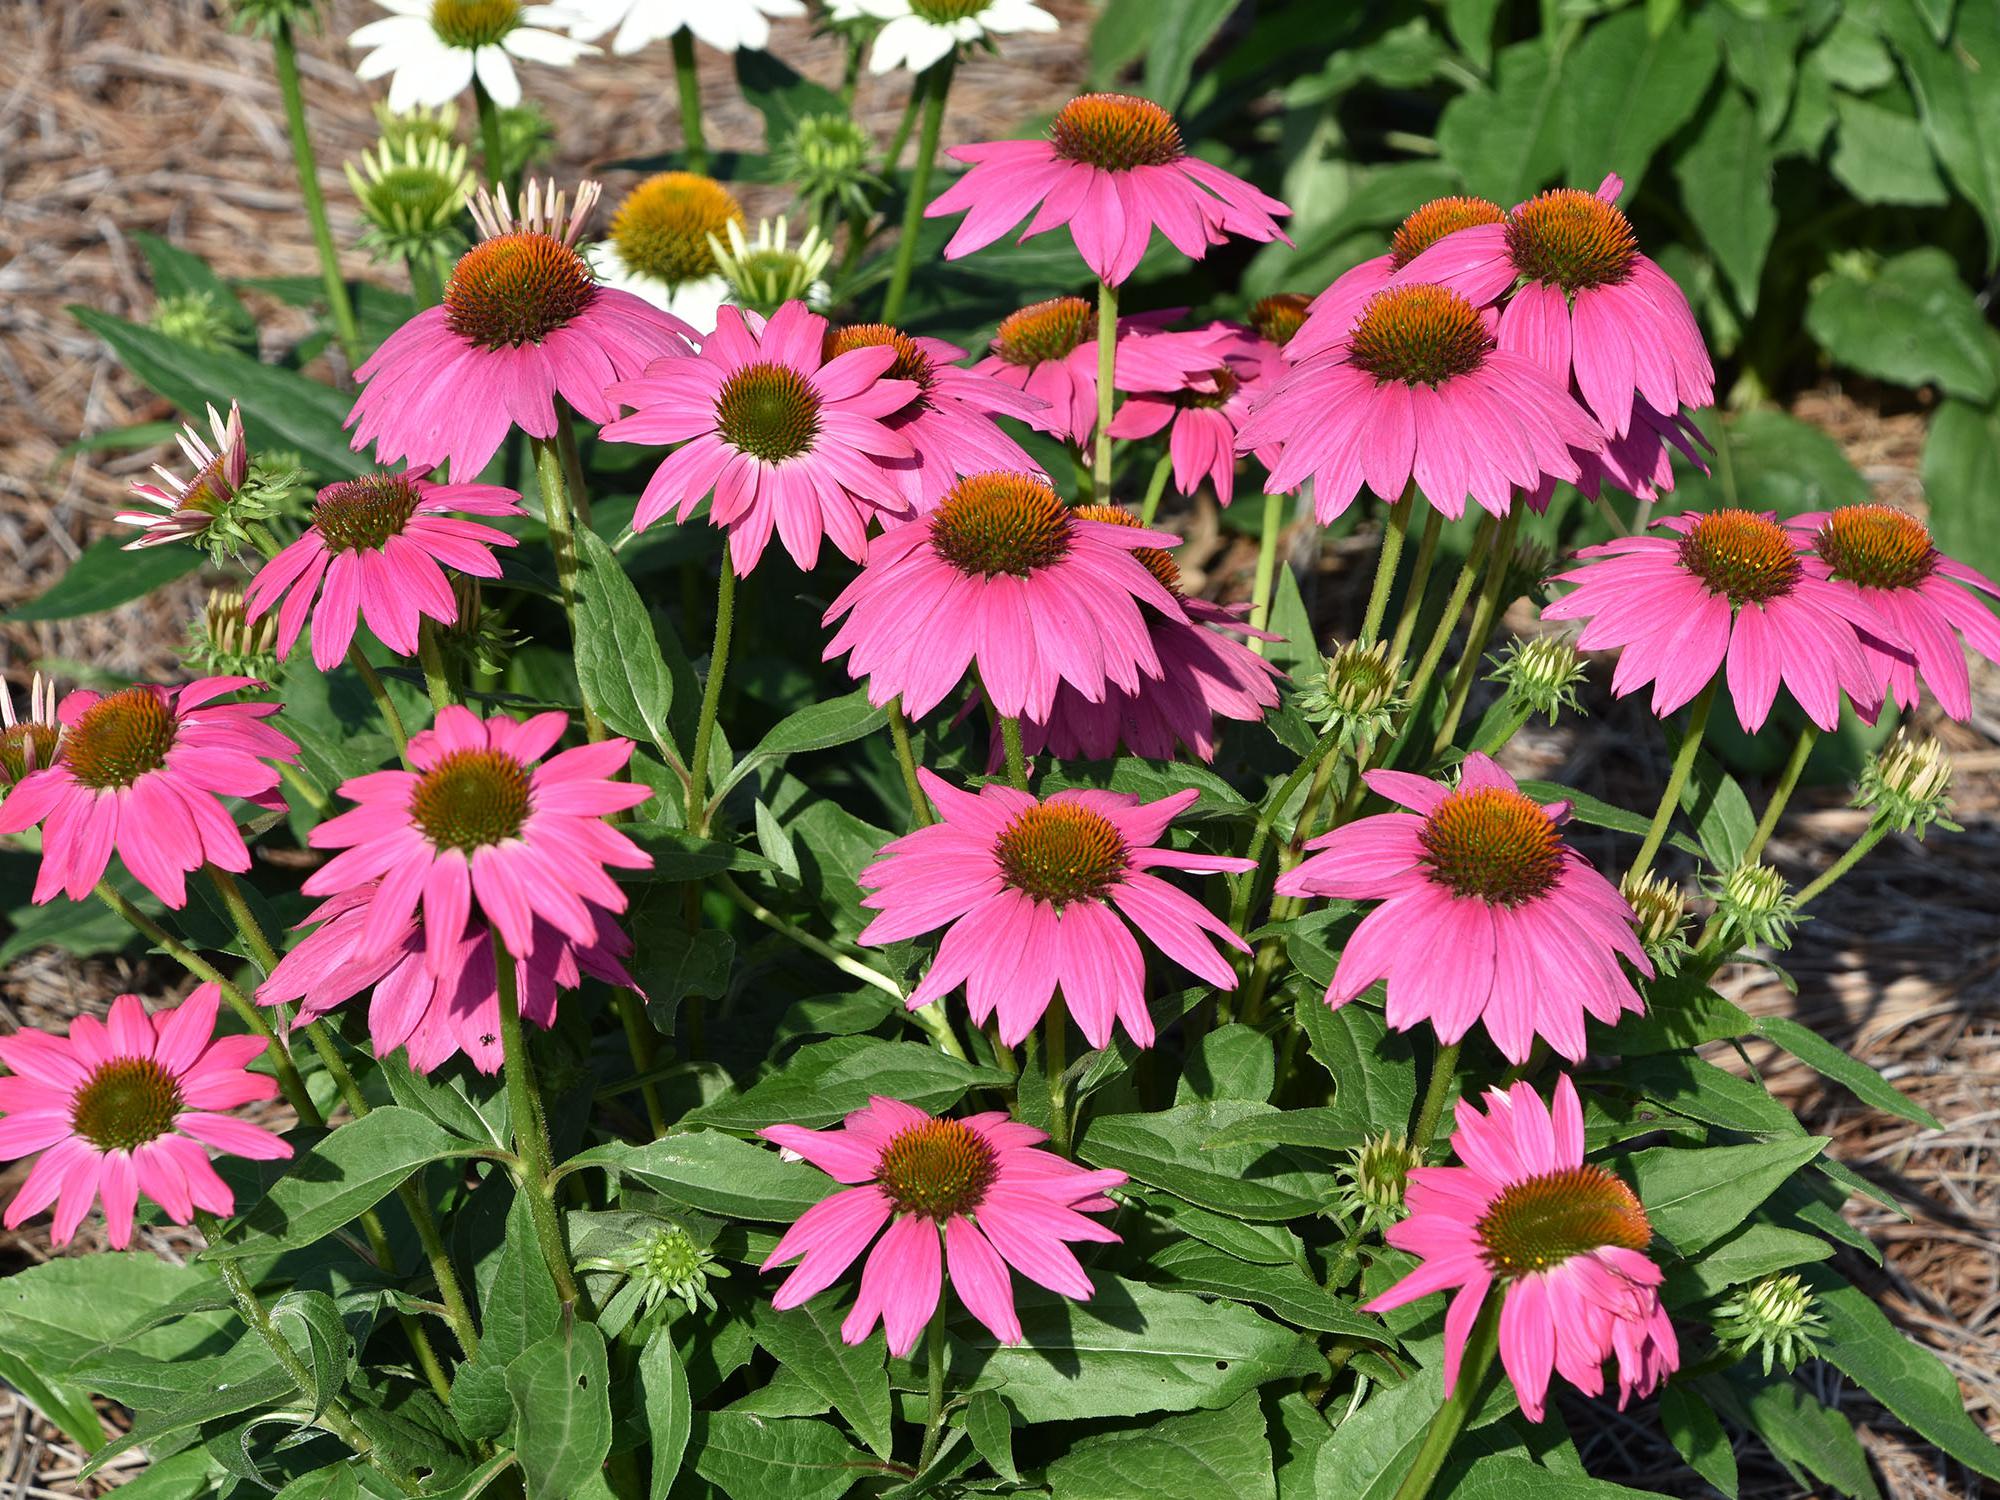 Echinacea Bravado is a popular coneflower that makes for a sturdy landscape plant. (Photo by Gary Bachman/MSU Extension Service)